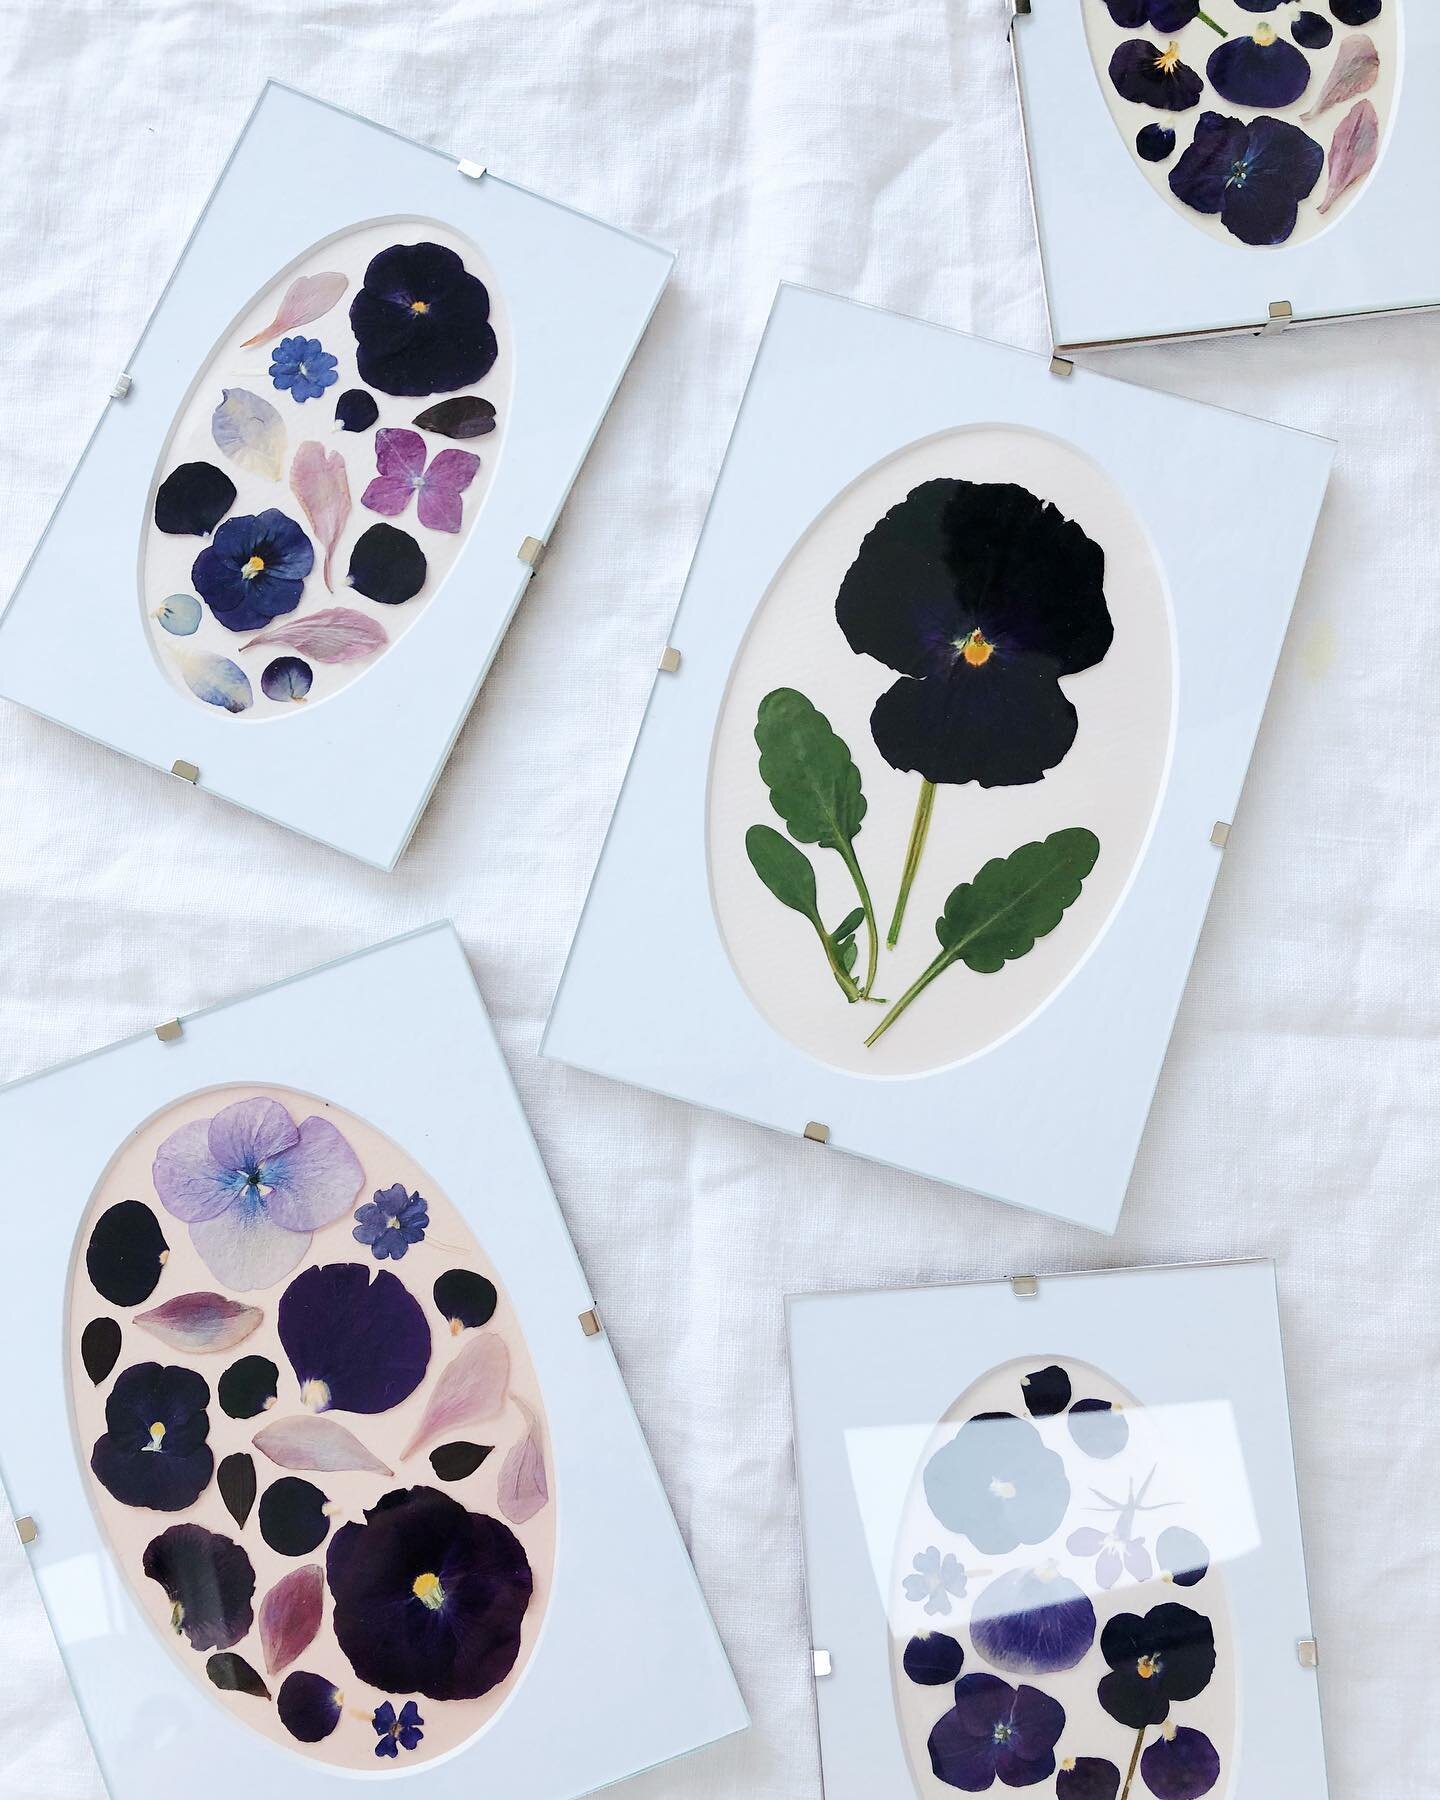 Oval flowers 🌸🌿 in time for the Christmas @craftyfoxmarket market 🎄